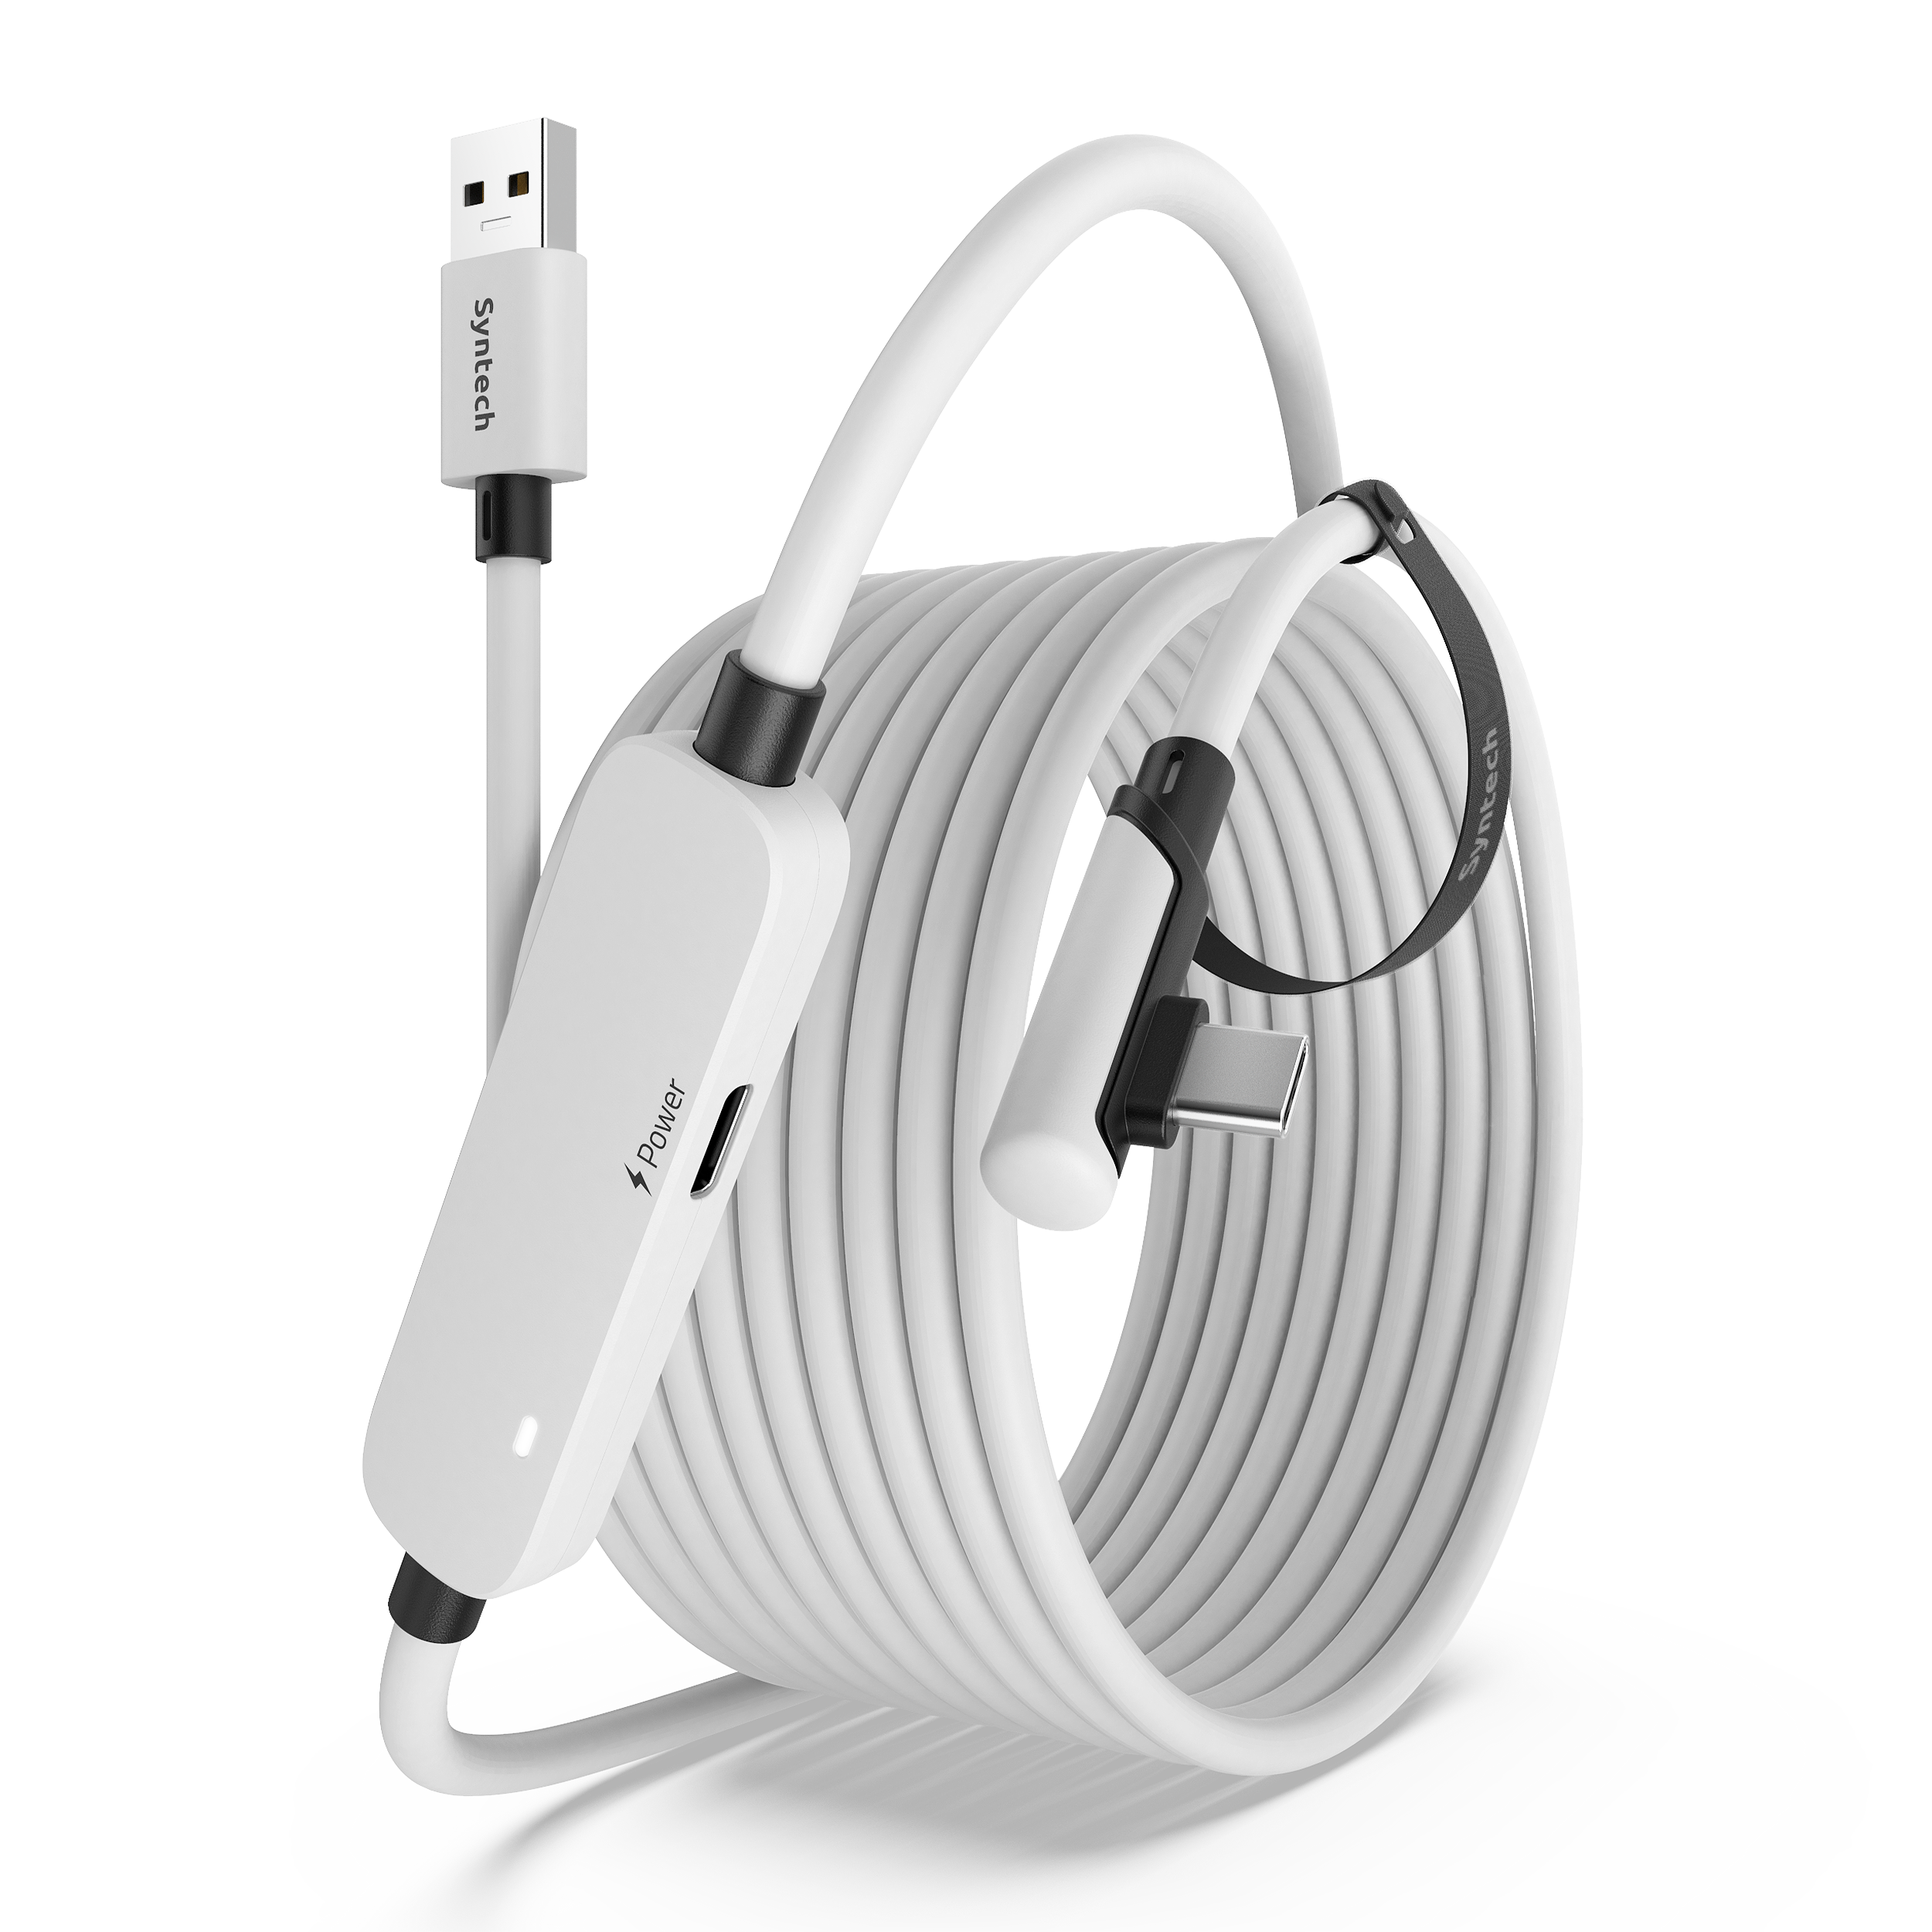 Charging Link Cable 16FT for Quest 2